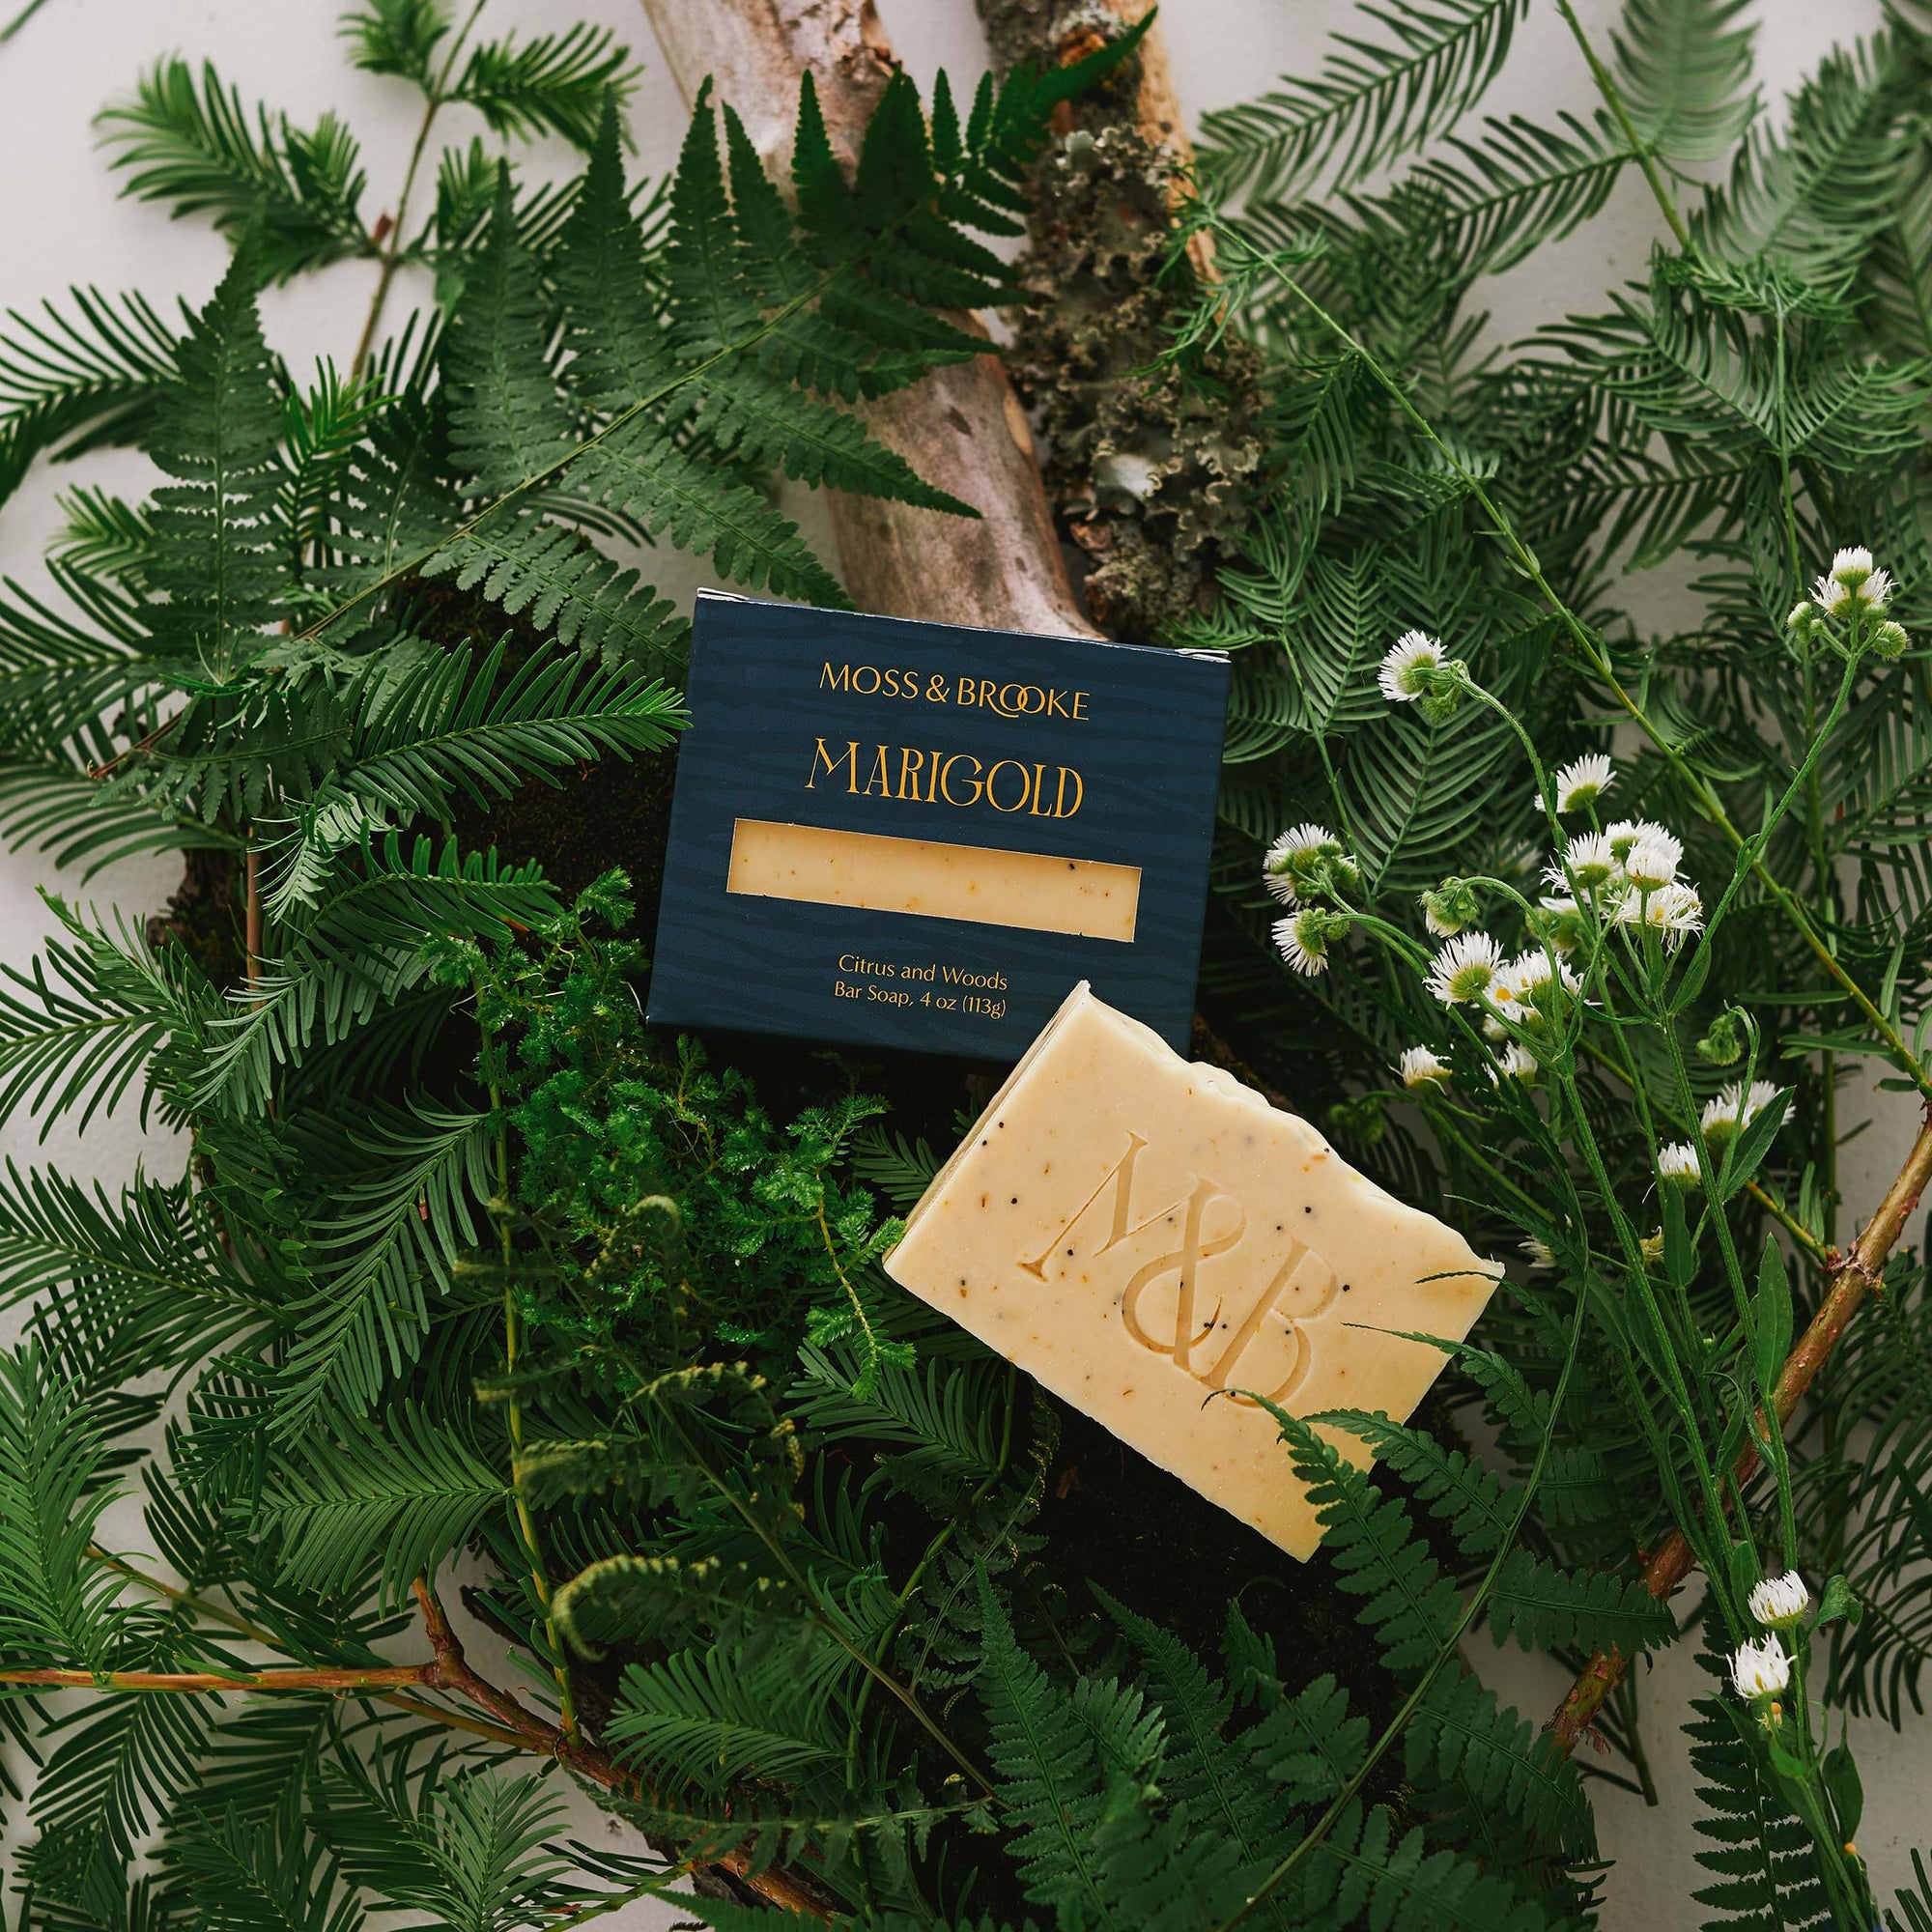 Moss and Brooke Marigold bar soap pictured on bed of forest greens and ferns. Soft yellow bar soap with flecks calendula petals and poppy seeds packaged in a dark teal luxurious box with metallic gold lettering.